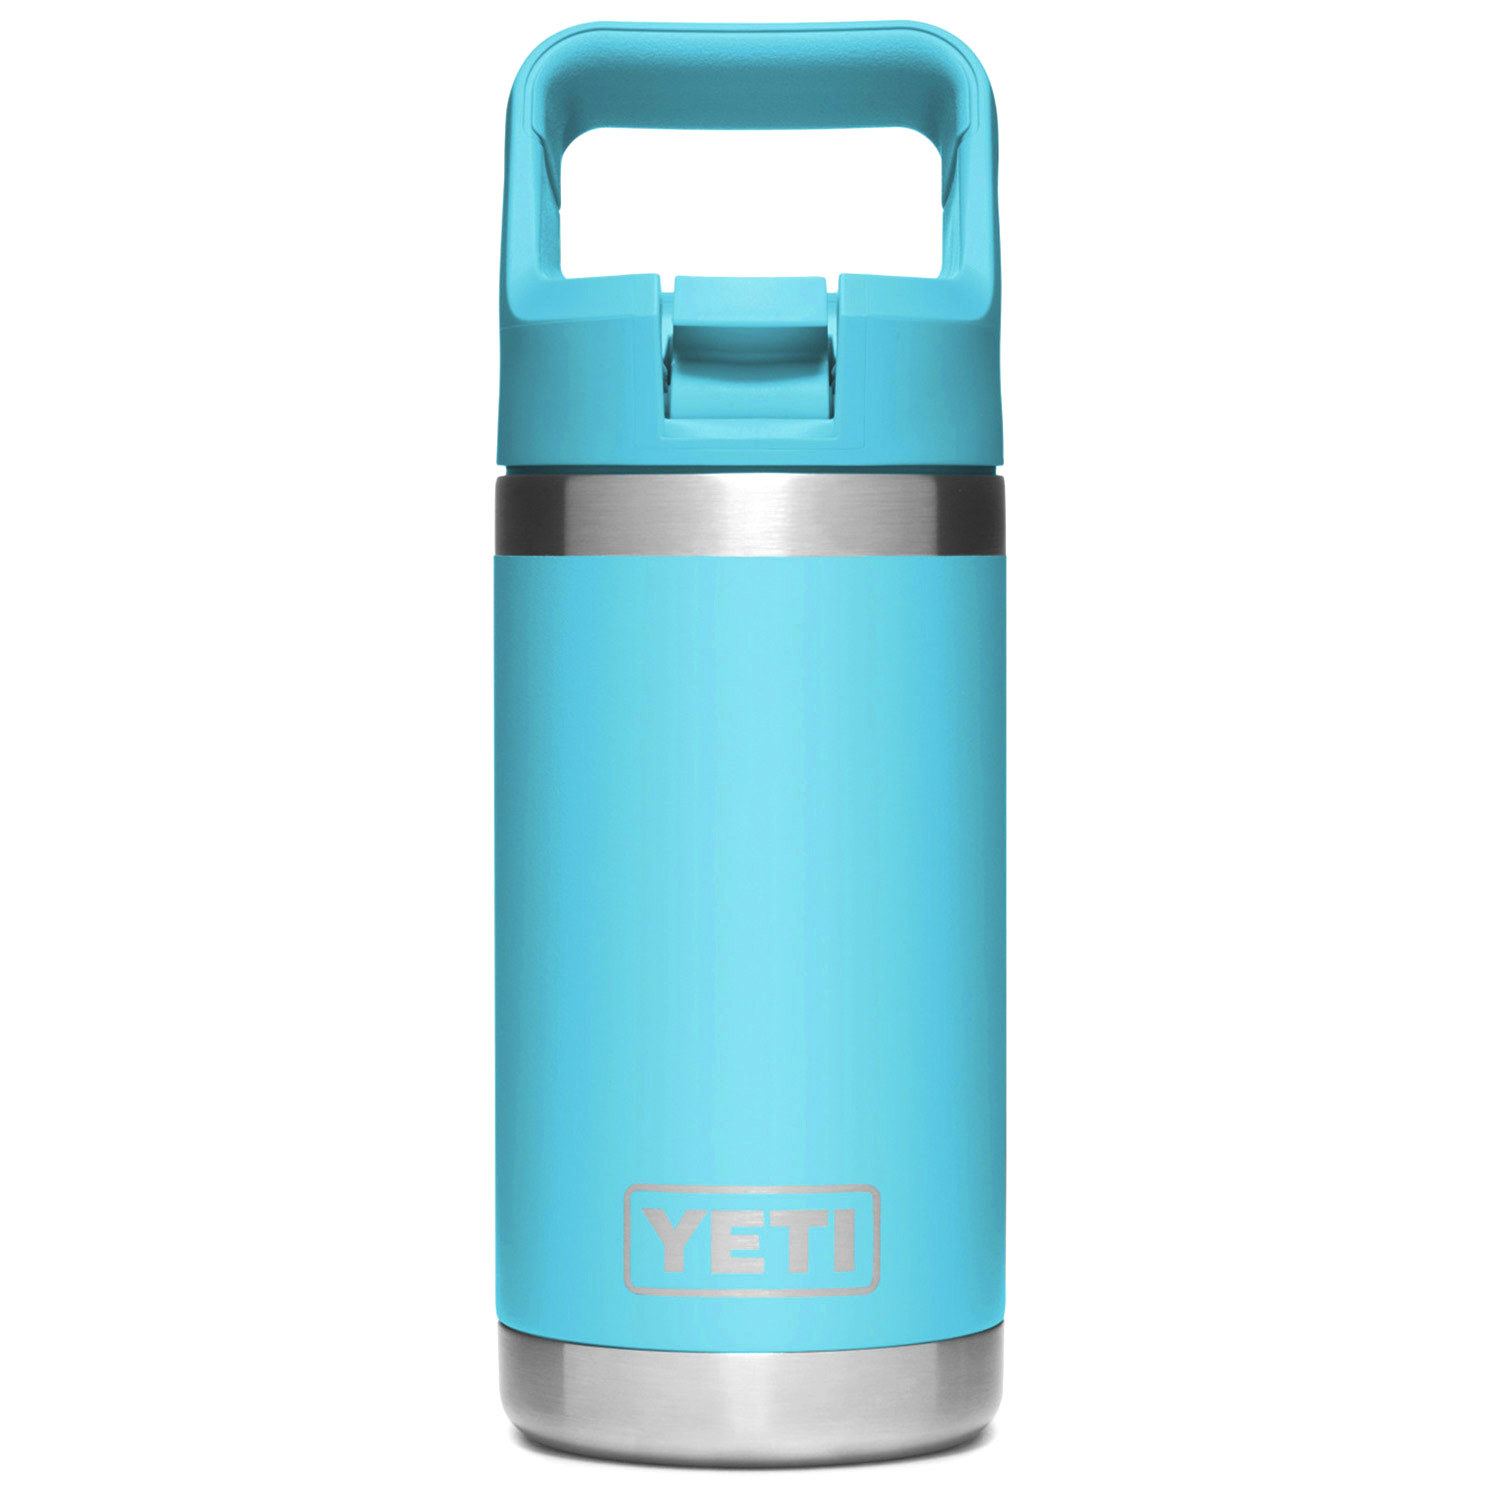 Replacement Straws Compatible with YETI Rambler Jr. 12 oz Kids Bottle-YETI  Rambler Kids Straws Replacement-Accessories Set Include 5 BPA-FREE Straws